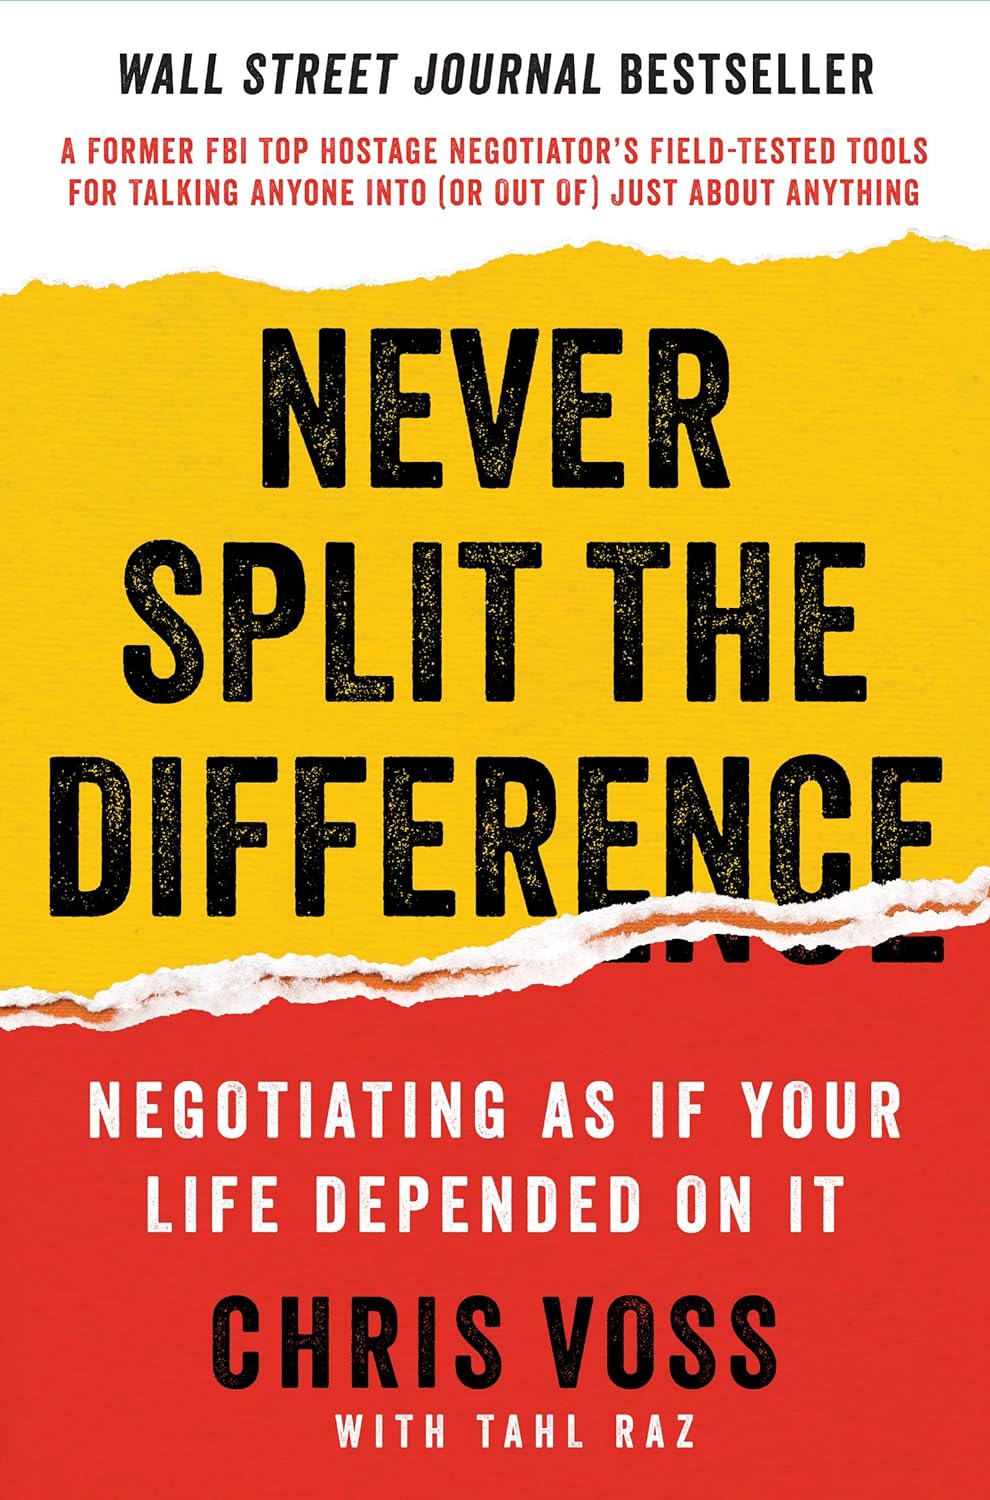 Chris Voss - Tahl Raz - Never Split the Difference. Negotiating As If Your Life Depended On It